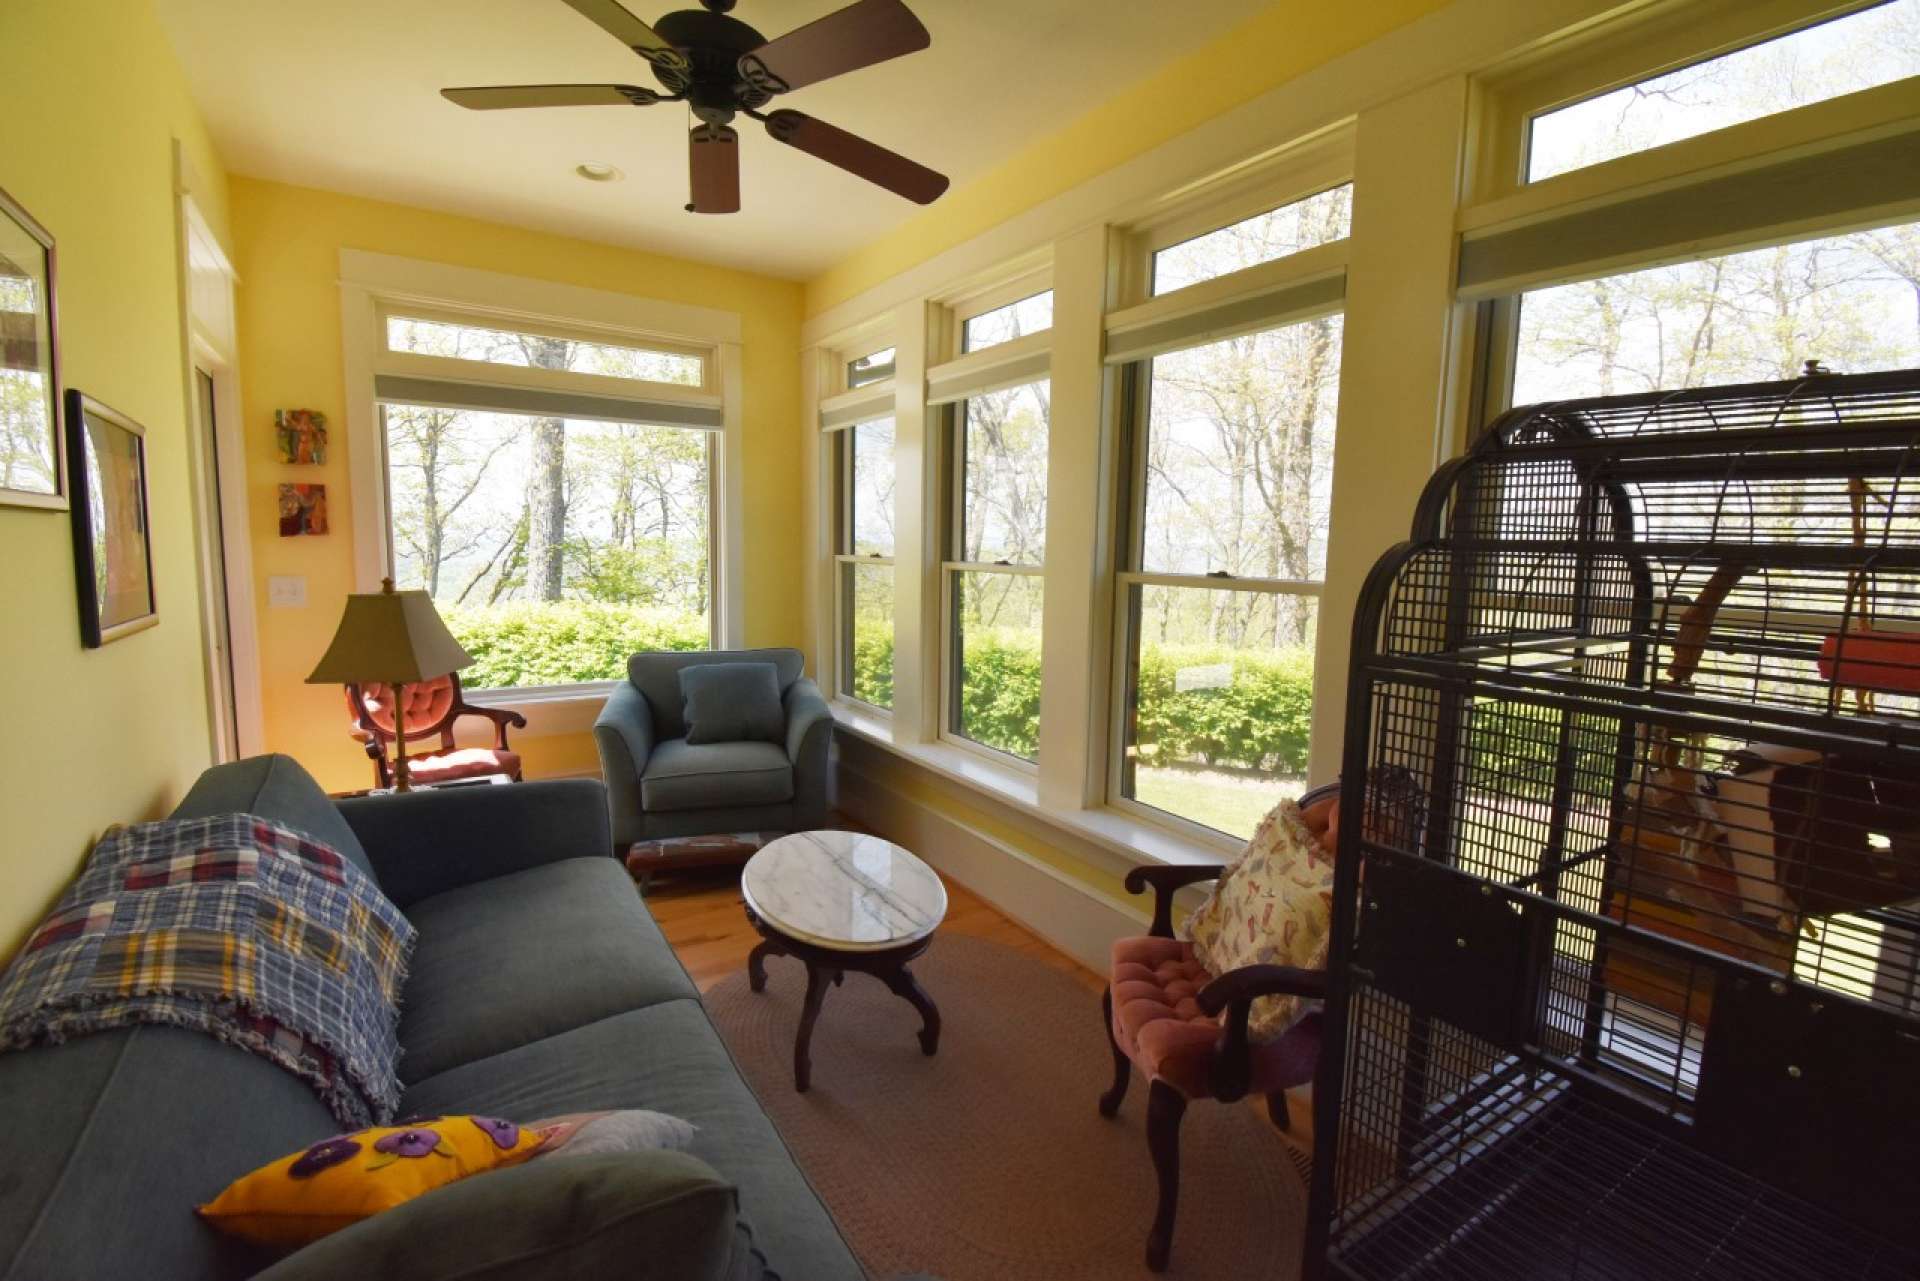 Also located on the main level is this sunroom boasting wood floors and plenty of windows.